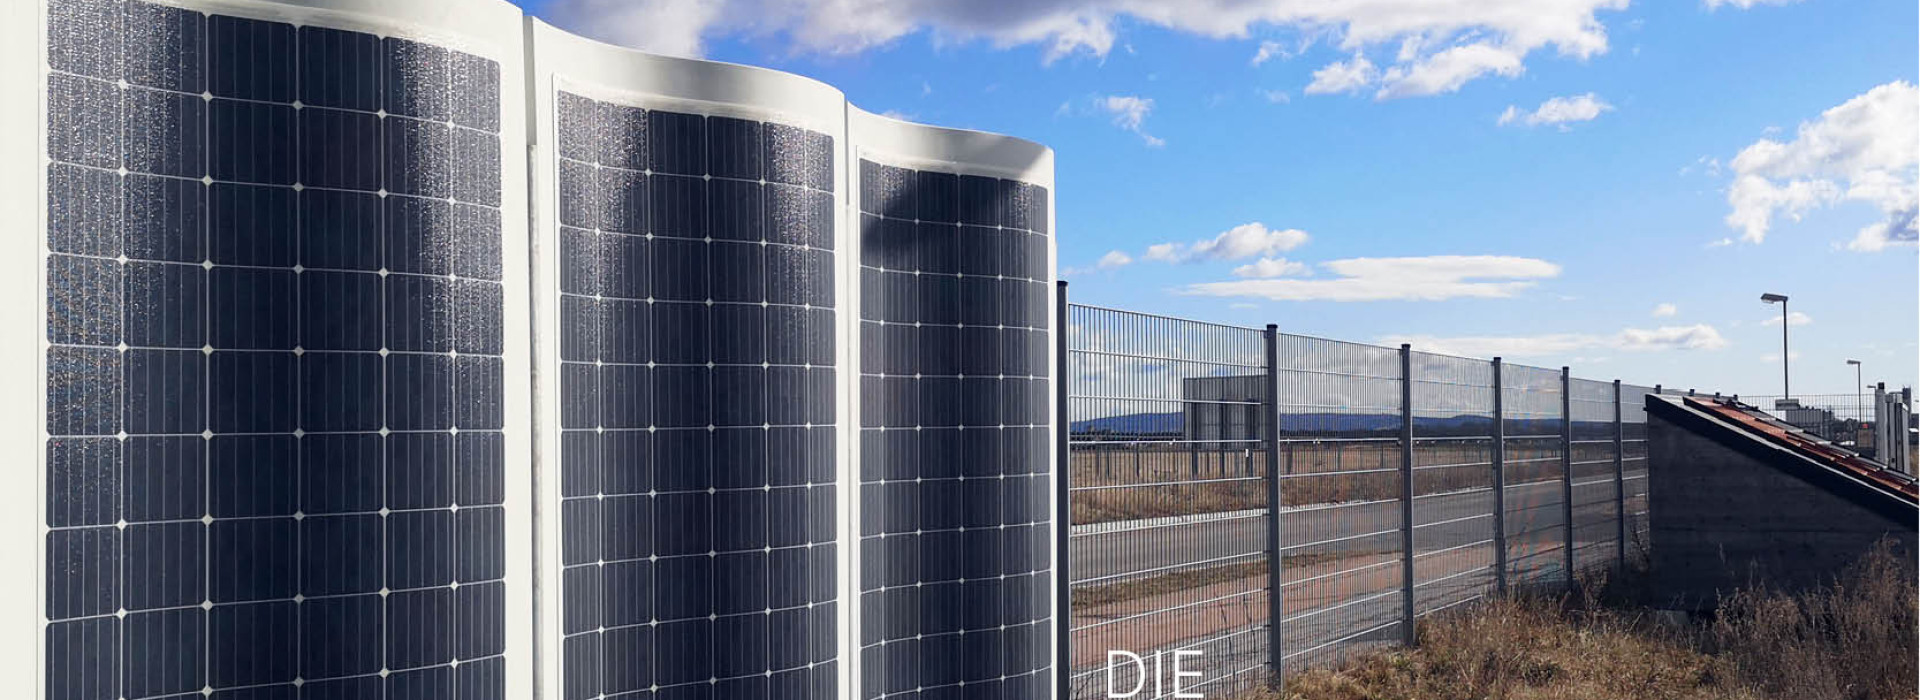 Noise protection as a solar power station